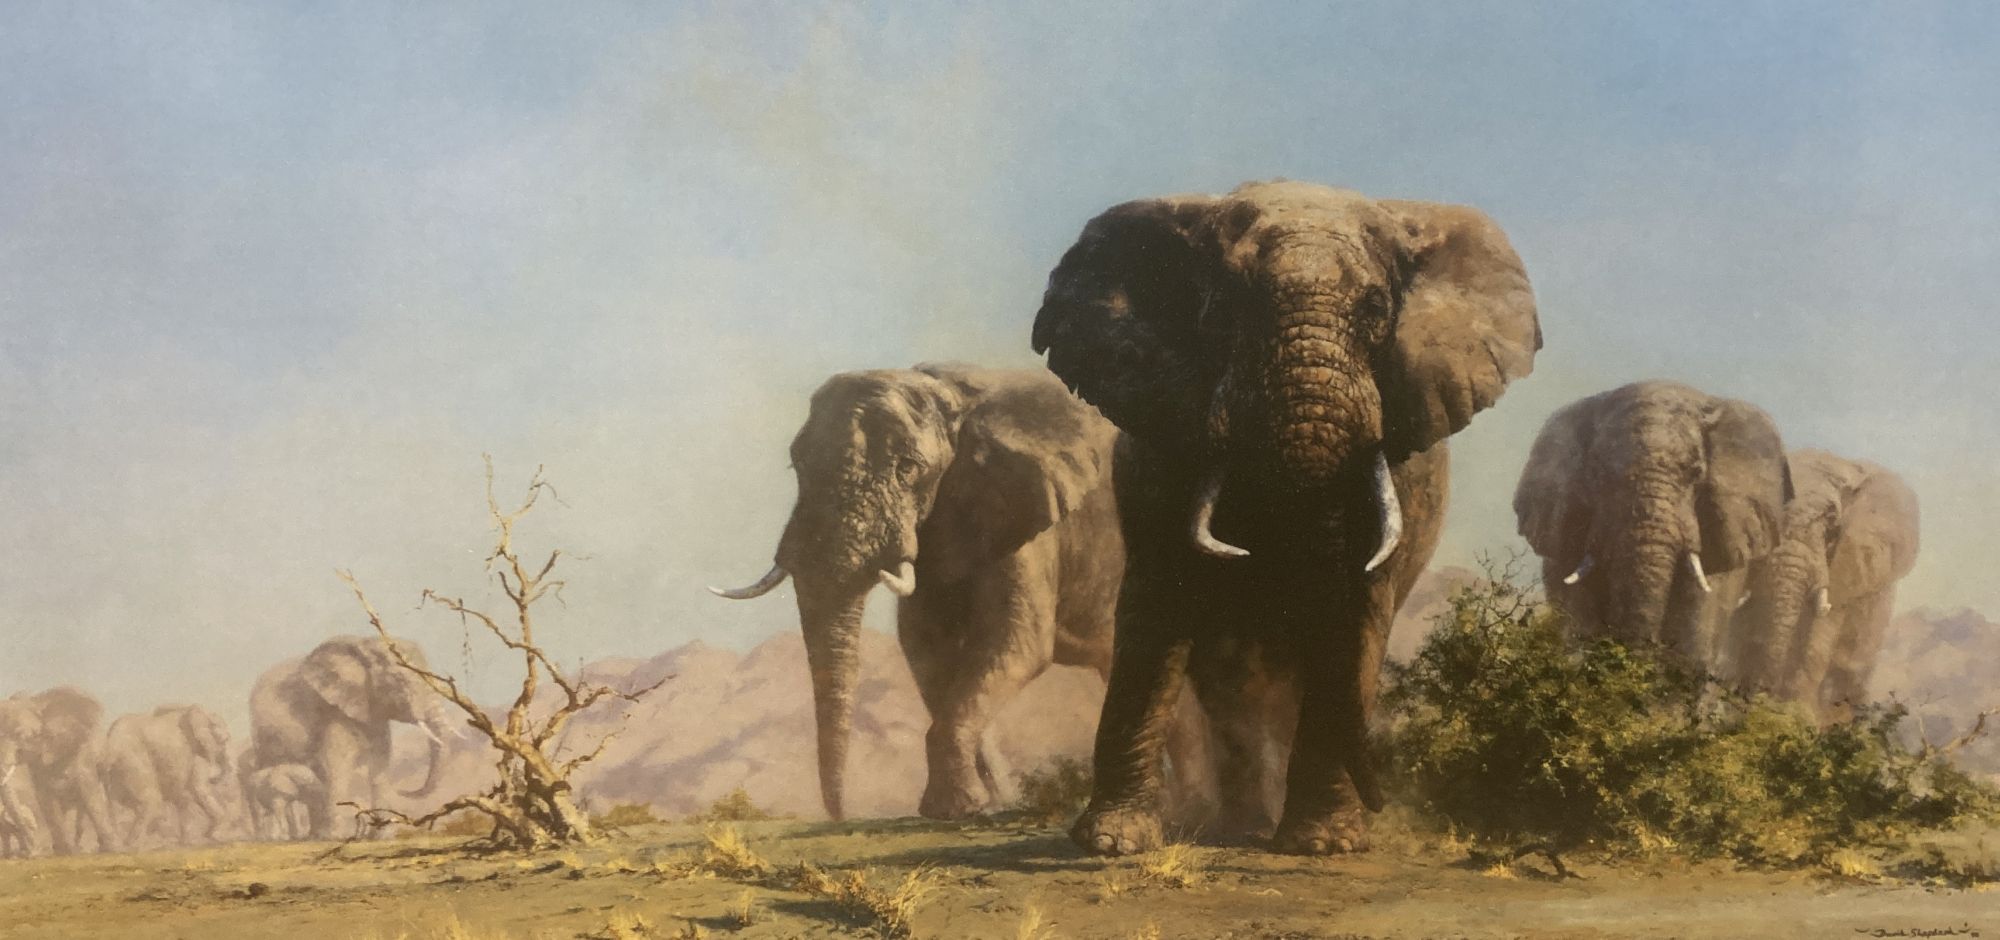 David Shepherd, limited edition print, Luangwa Evening, signed, 185/1500 and The Ivory is Theirs, unsigned, 39 x 73cm and 37 x 75cm